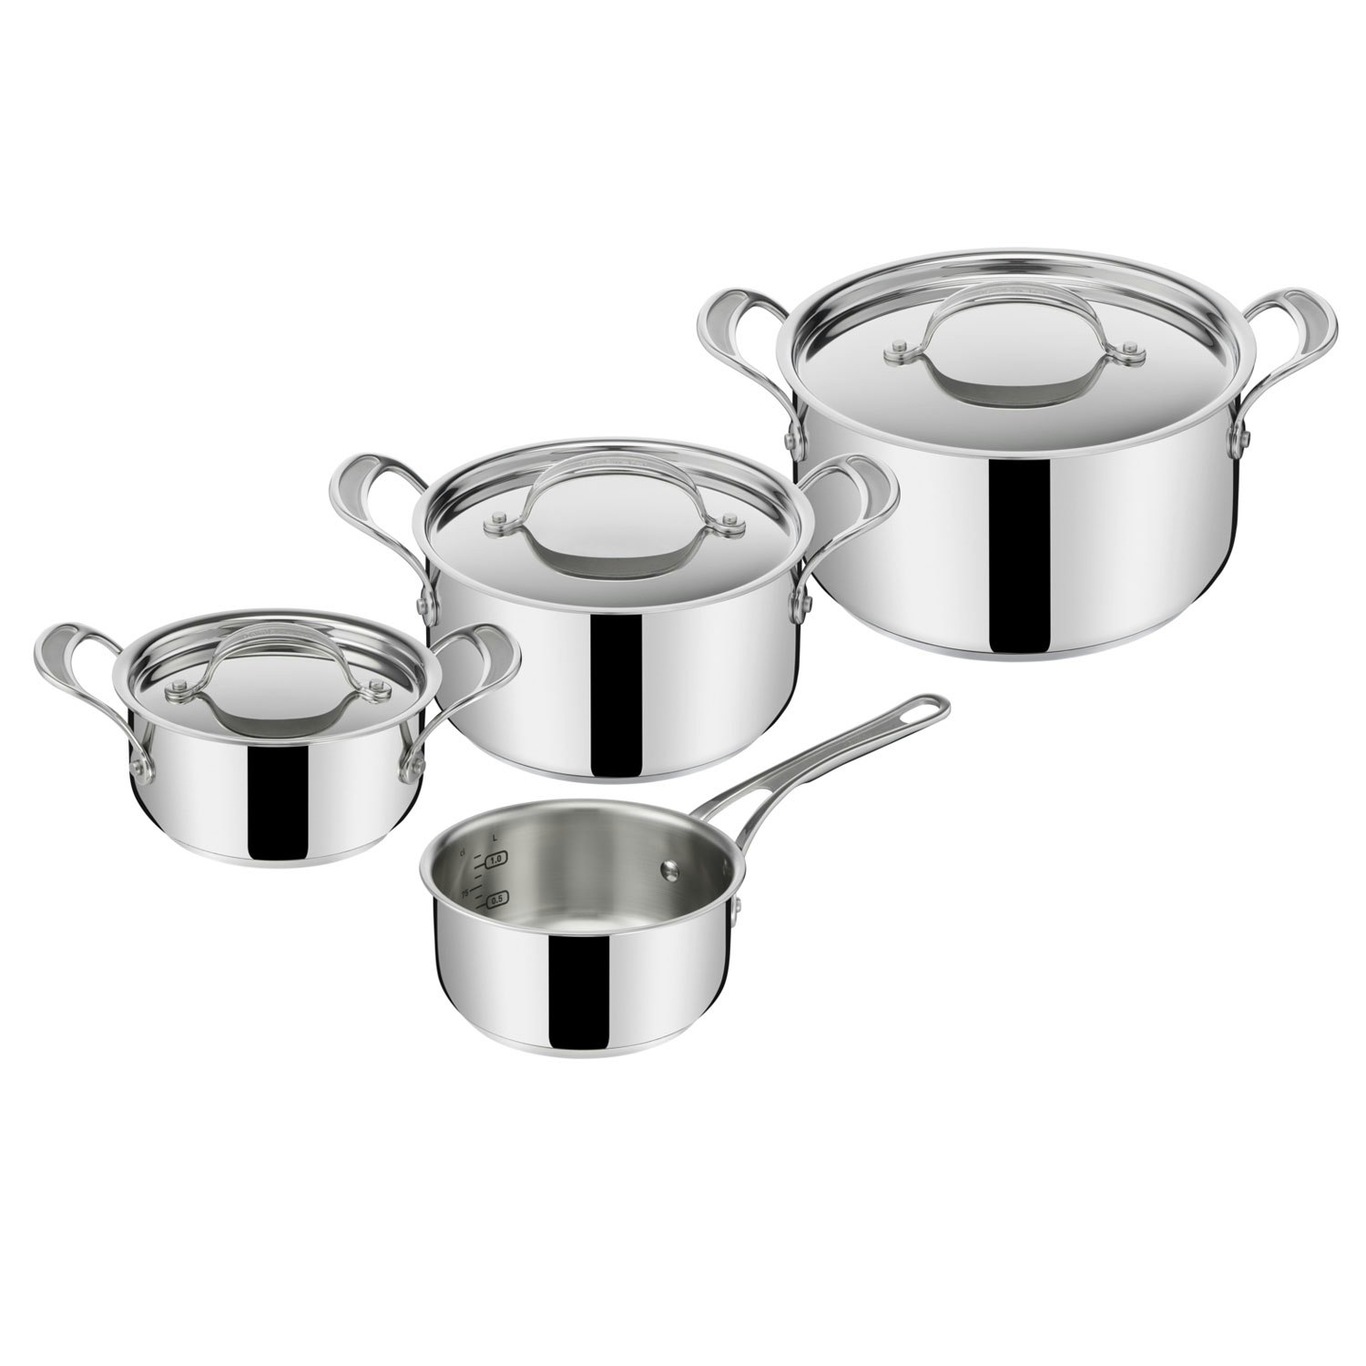 https://royaldesign.com/image/2/tefal-jamie-oliver-cooks-classic-pot-set-stainless-steel-7-pieces-0?w=800&quality=80